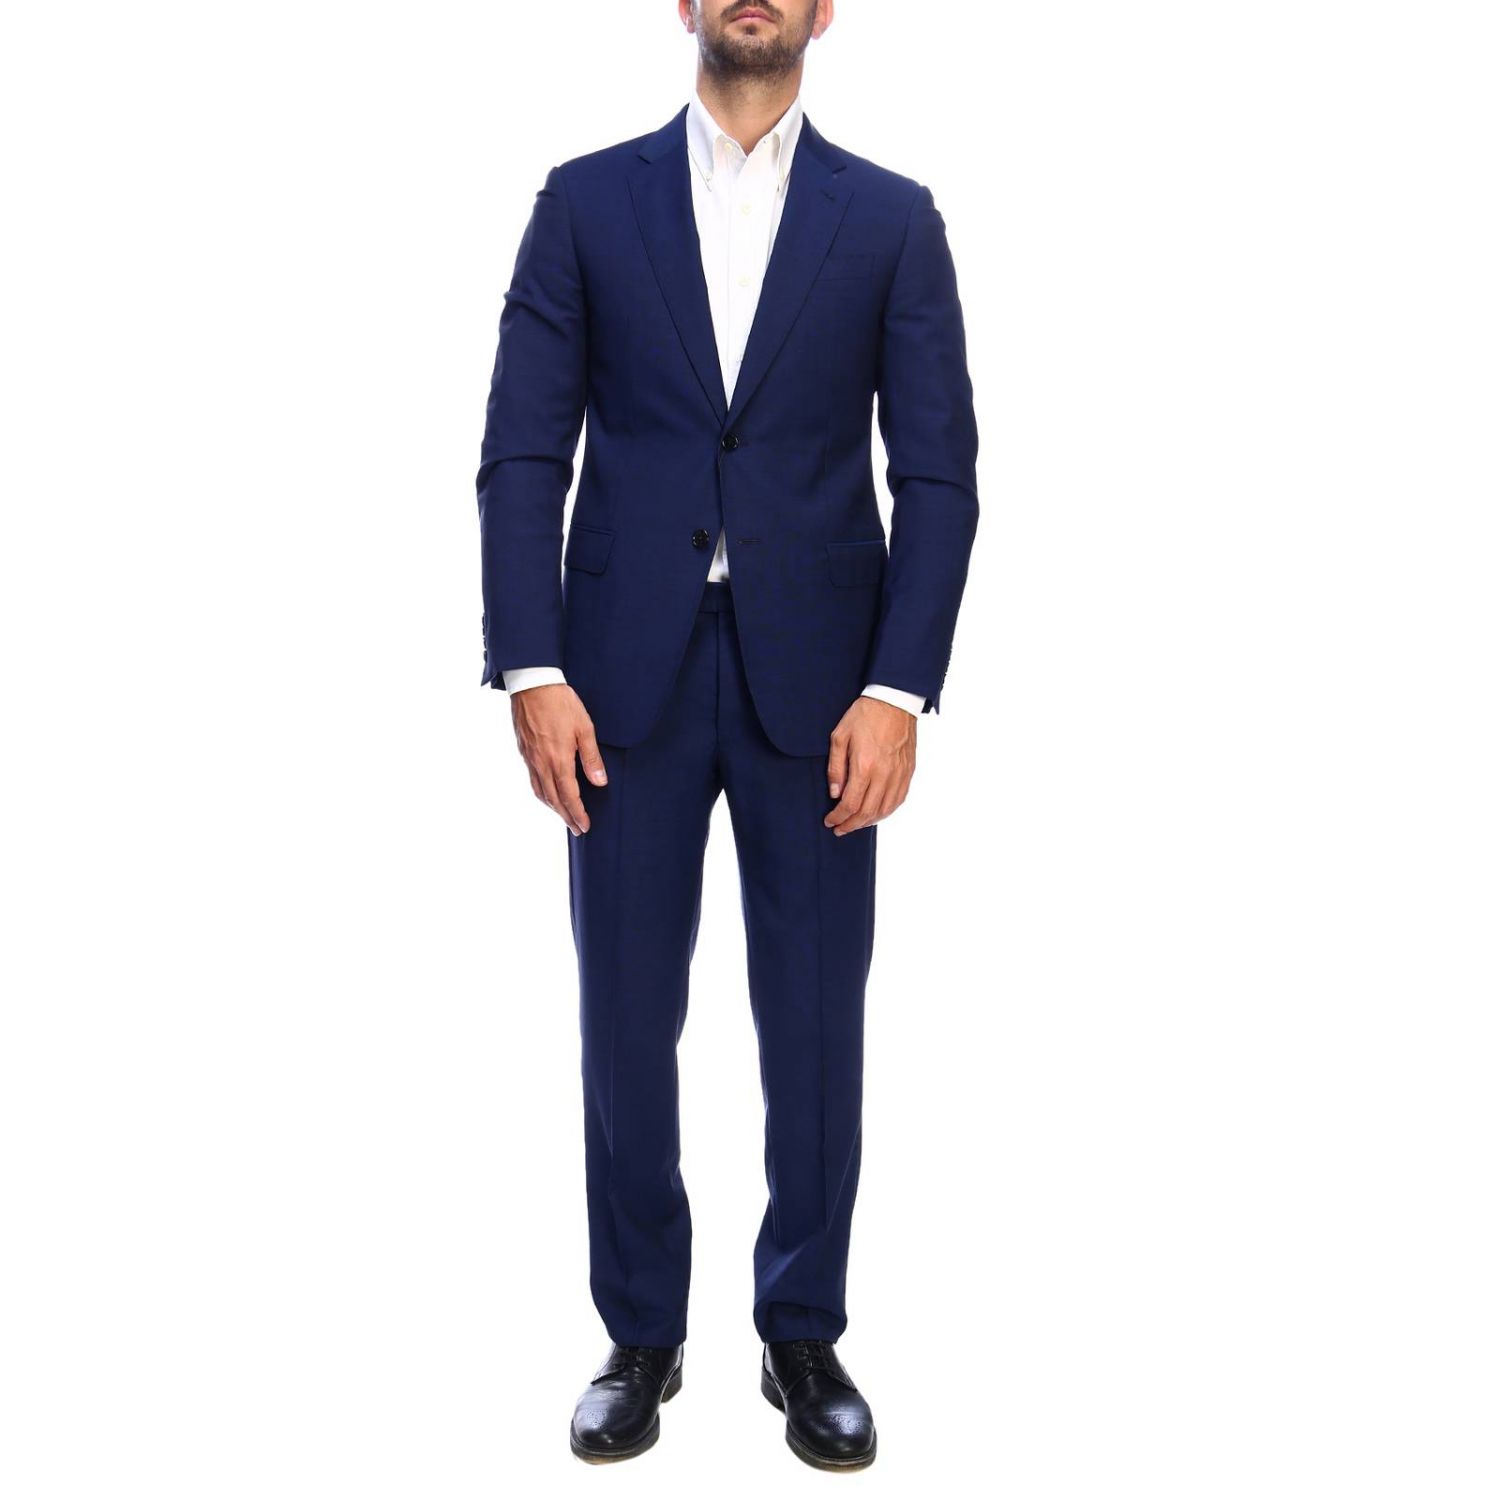 Emporio Armani Outlet: suit for man - Blue | Emporio Armani suit 21VGEB  21544 online on 